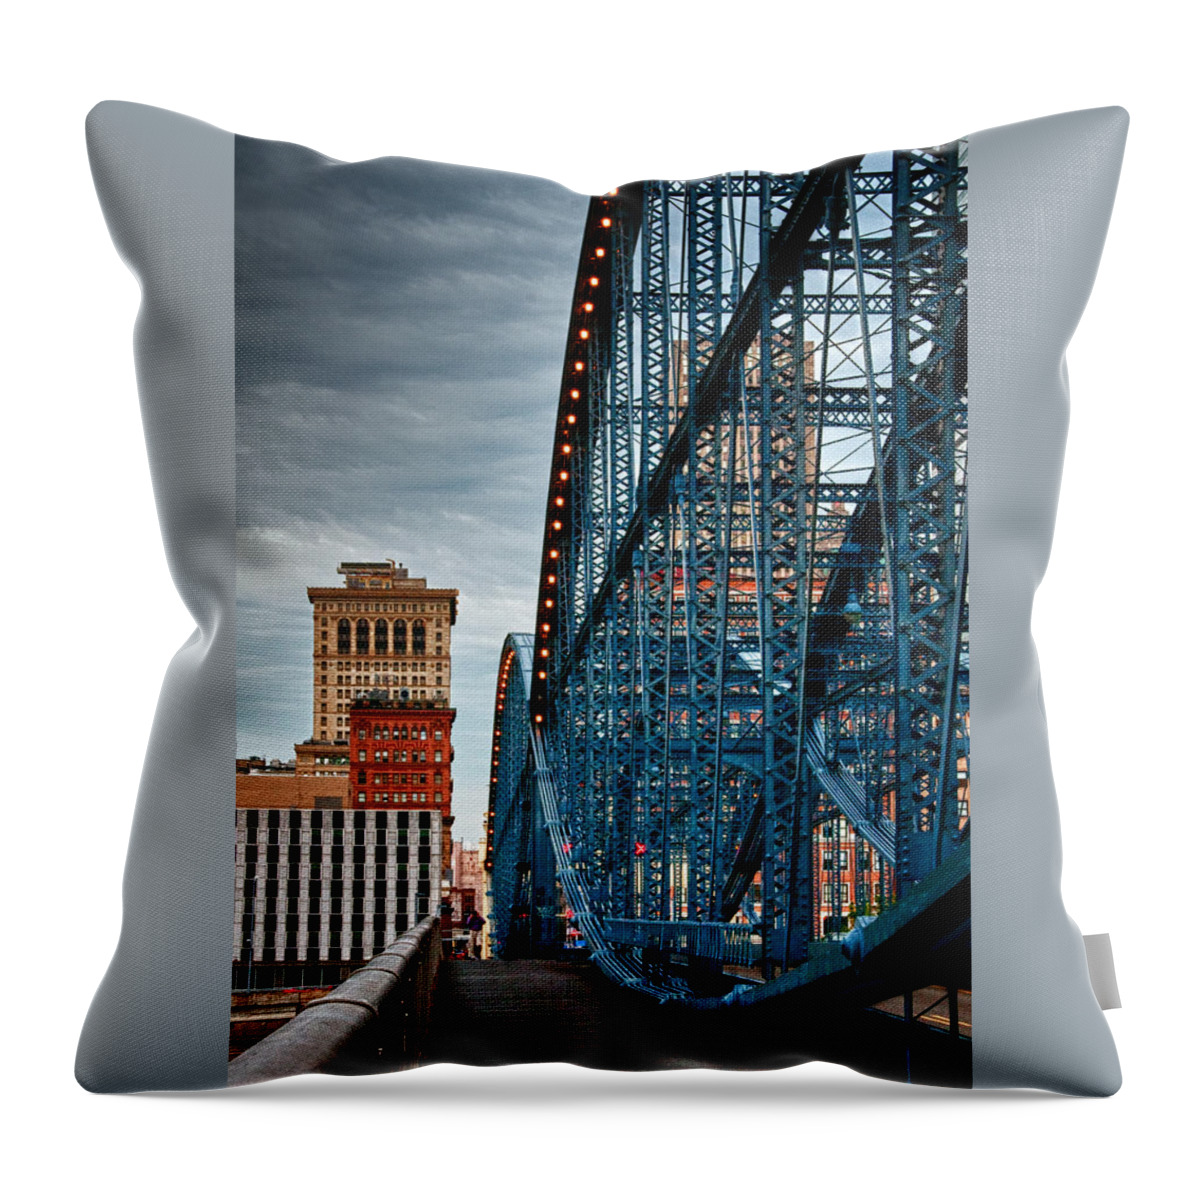 Smithfield Street Bridge Throw Pillow featuring the photograph Crossing the Smithfield Street Bridge - Pittsburgh - Color by Mitch Spence